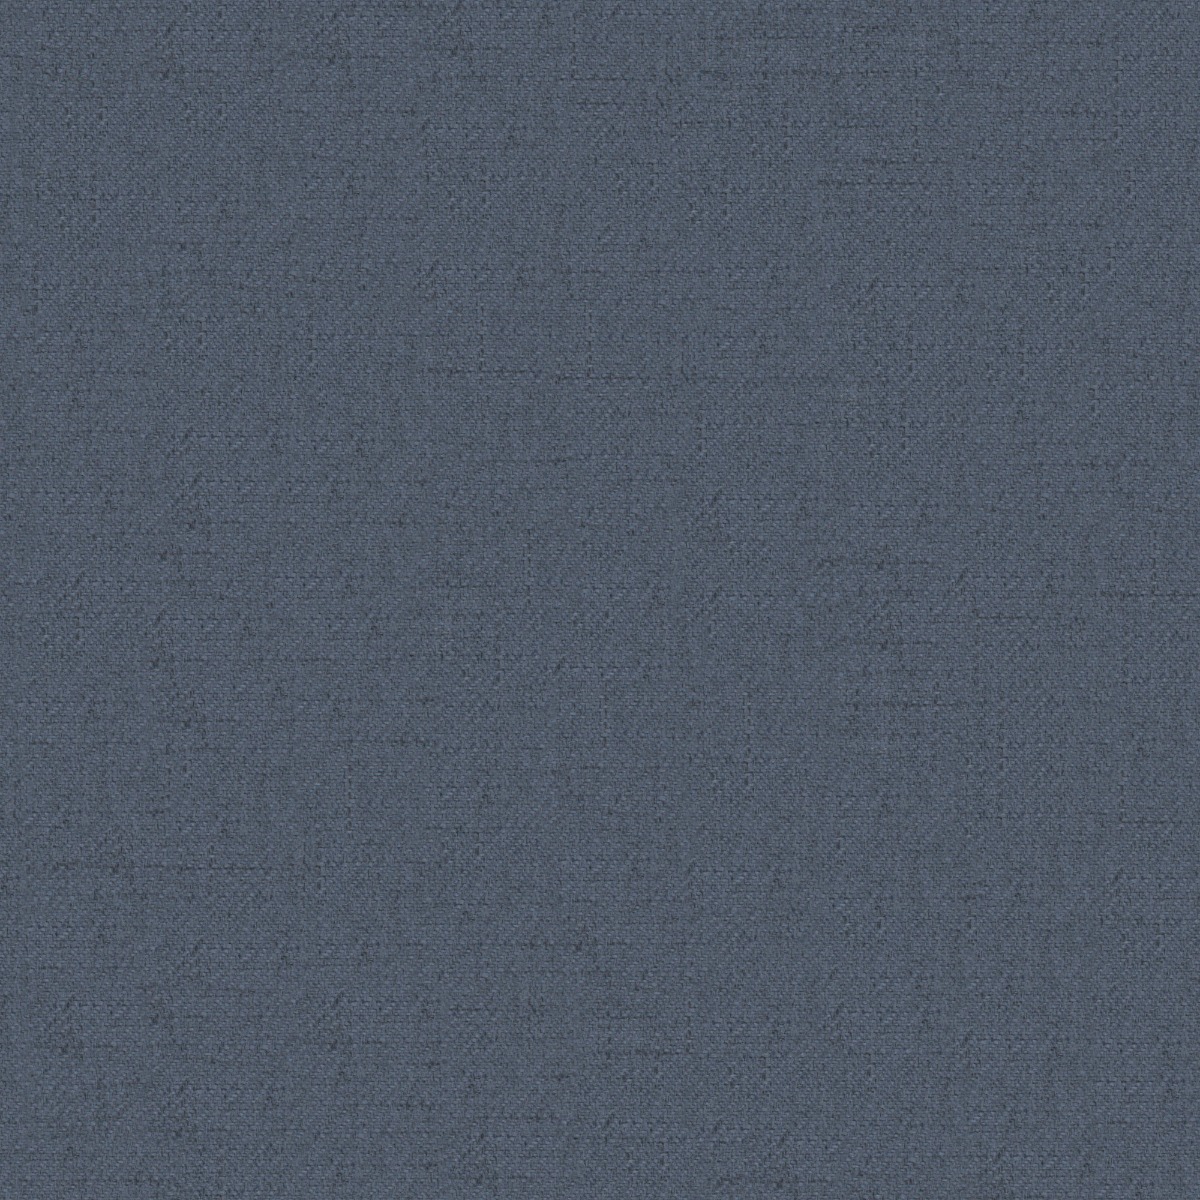 A seamless fabric texture with plain blue texture units arranged in a None pattern